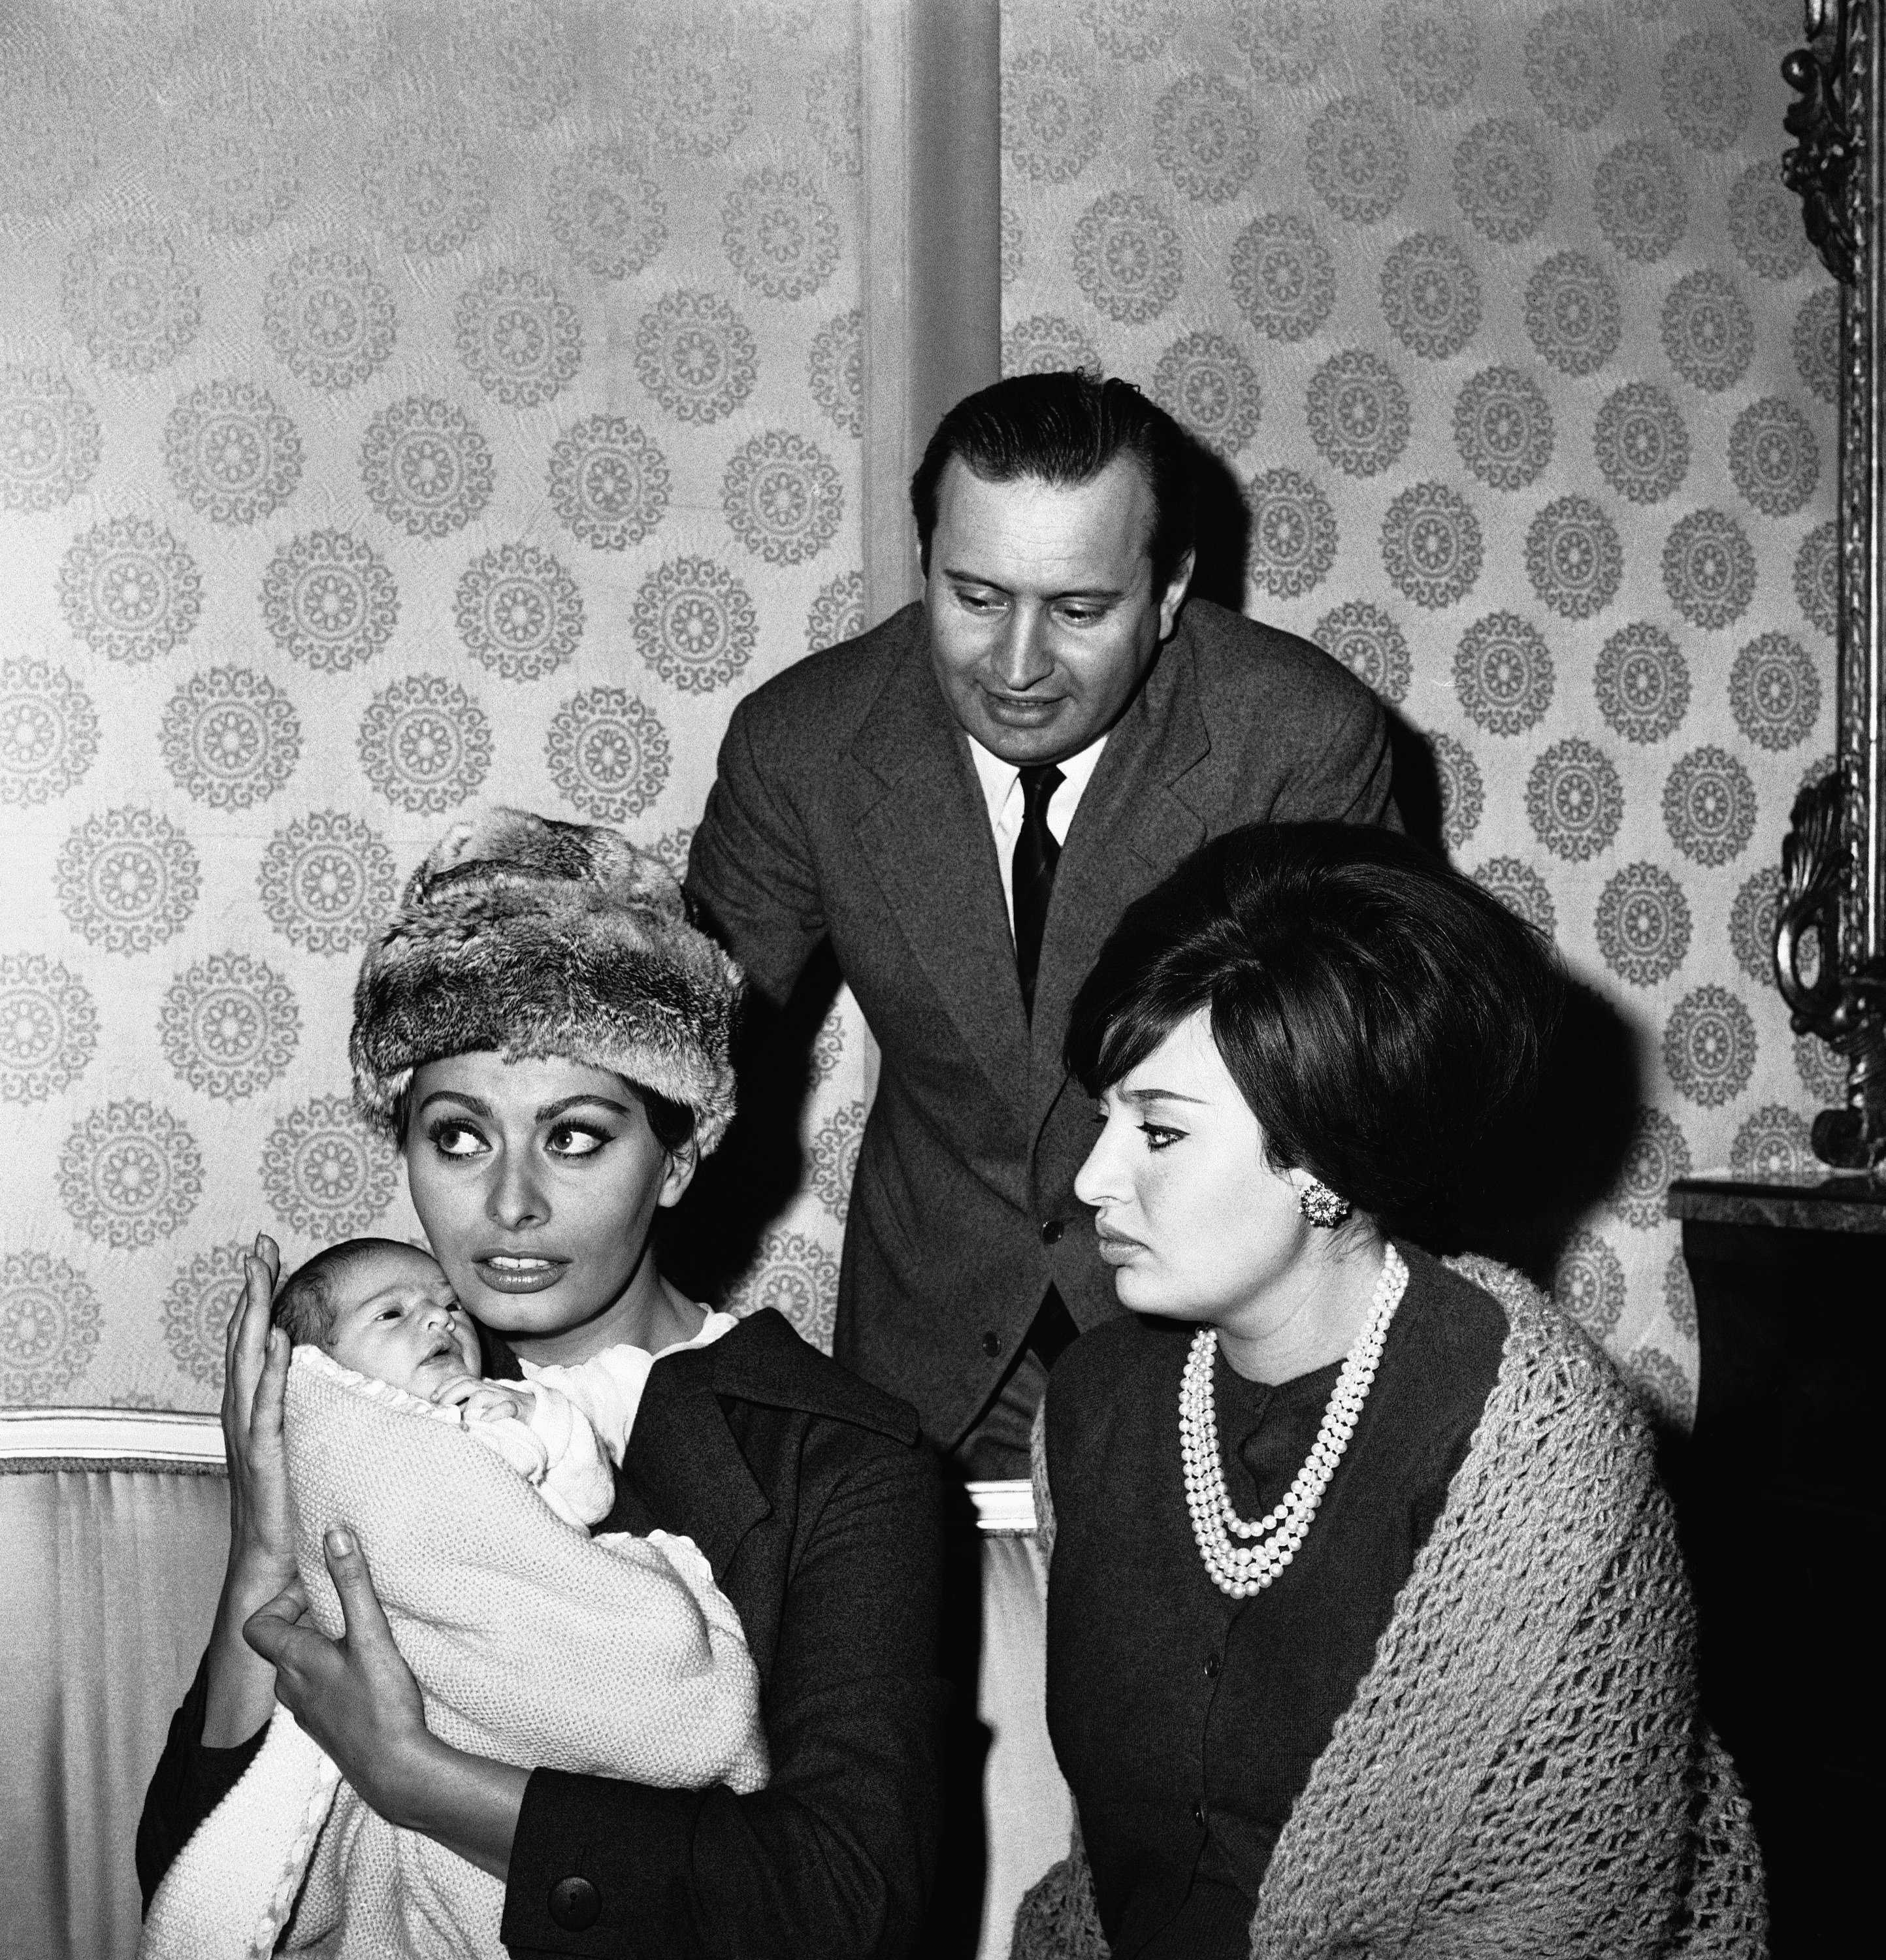 Italian actress Sophia Loren (L) holds her niece, 12-day old Alessandra, during a picture-taking session in the apartment of the child’s parents, Romano Mussolini (C), youngest son of dictator Benito Mussolini, and Sophia’s sister Maria, in Rome, Italy, Jan. 11, 1963. (AP Photo)